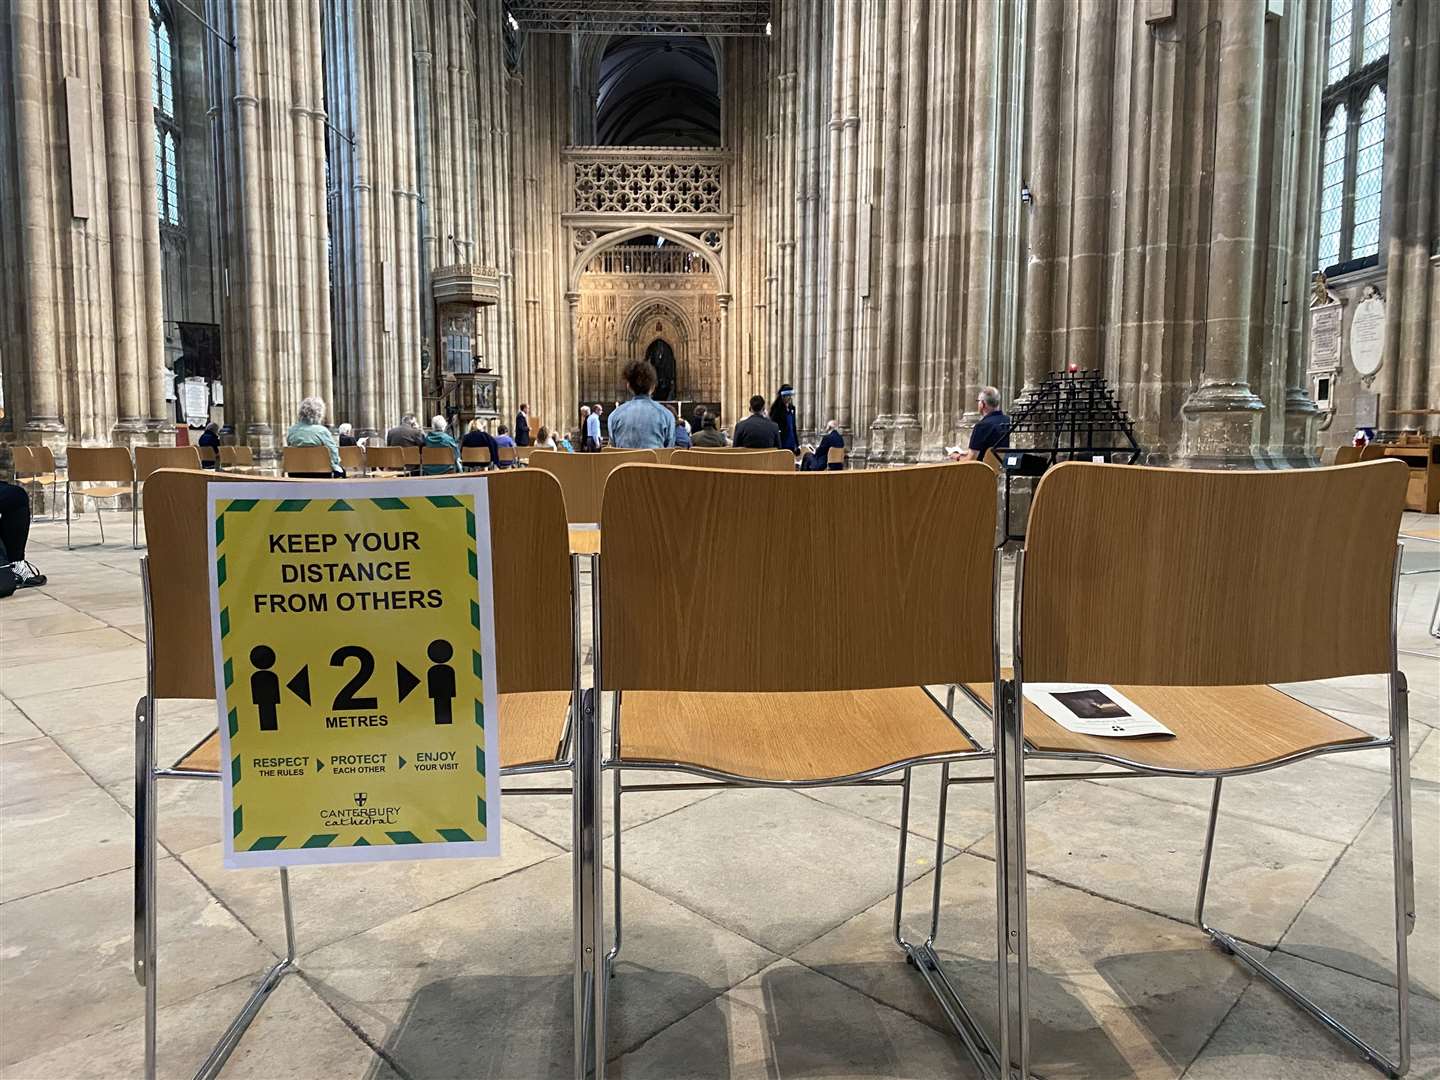 The first Sunday Eucharist service at Canterbury Cathedral after lockdown was led by Archbishop Justin Welby. Chairs were arranged so people could social distance, hand sanitiser stations were found throughout and donations were accepted through card payment.